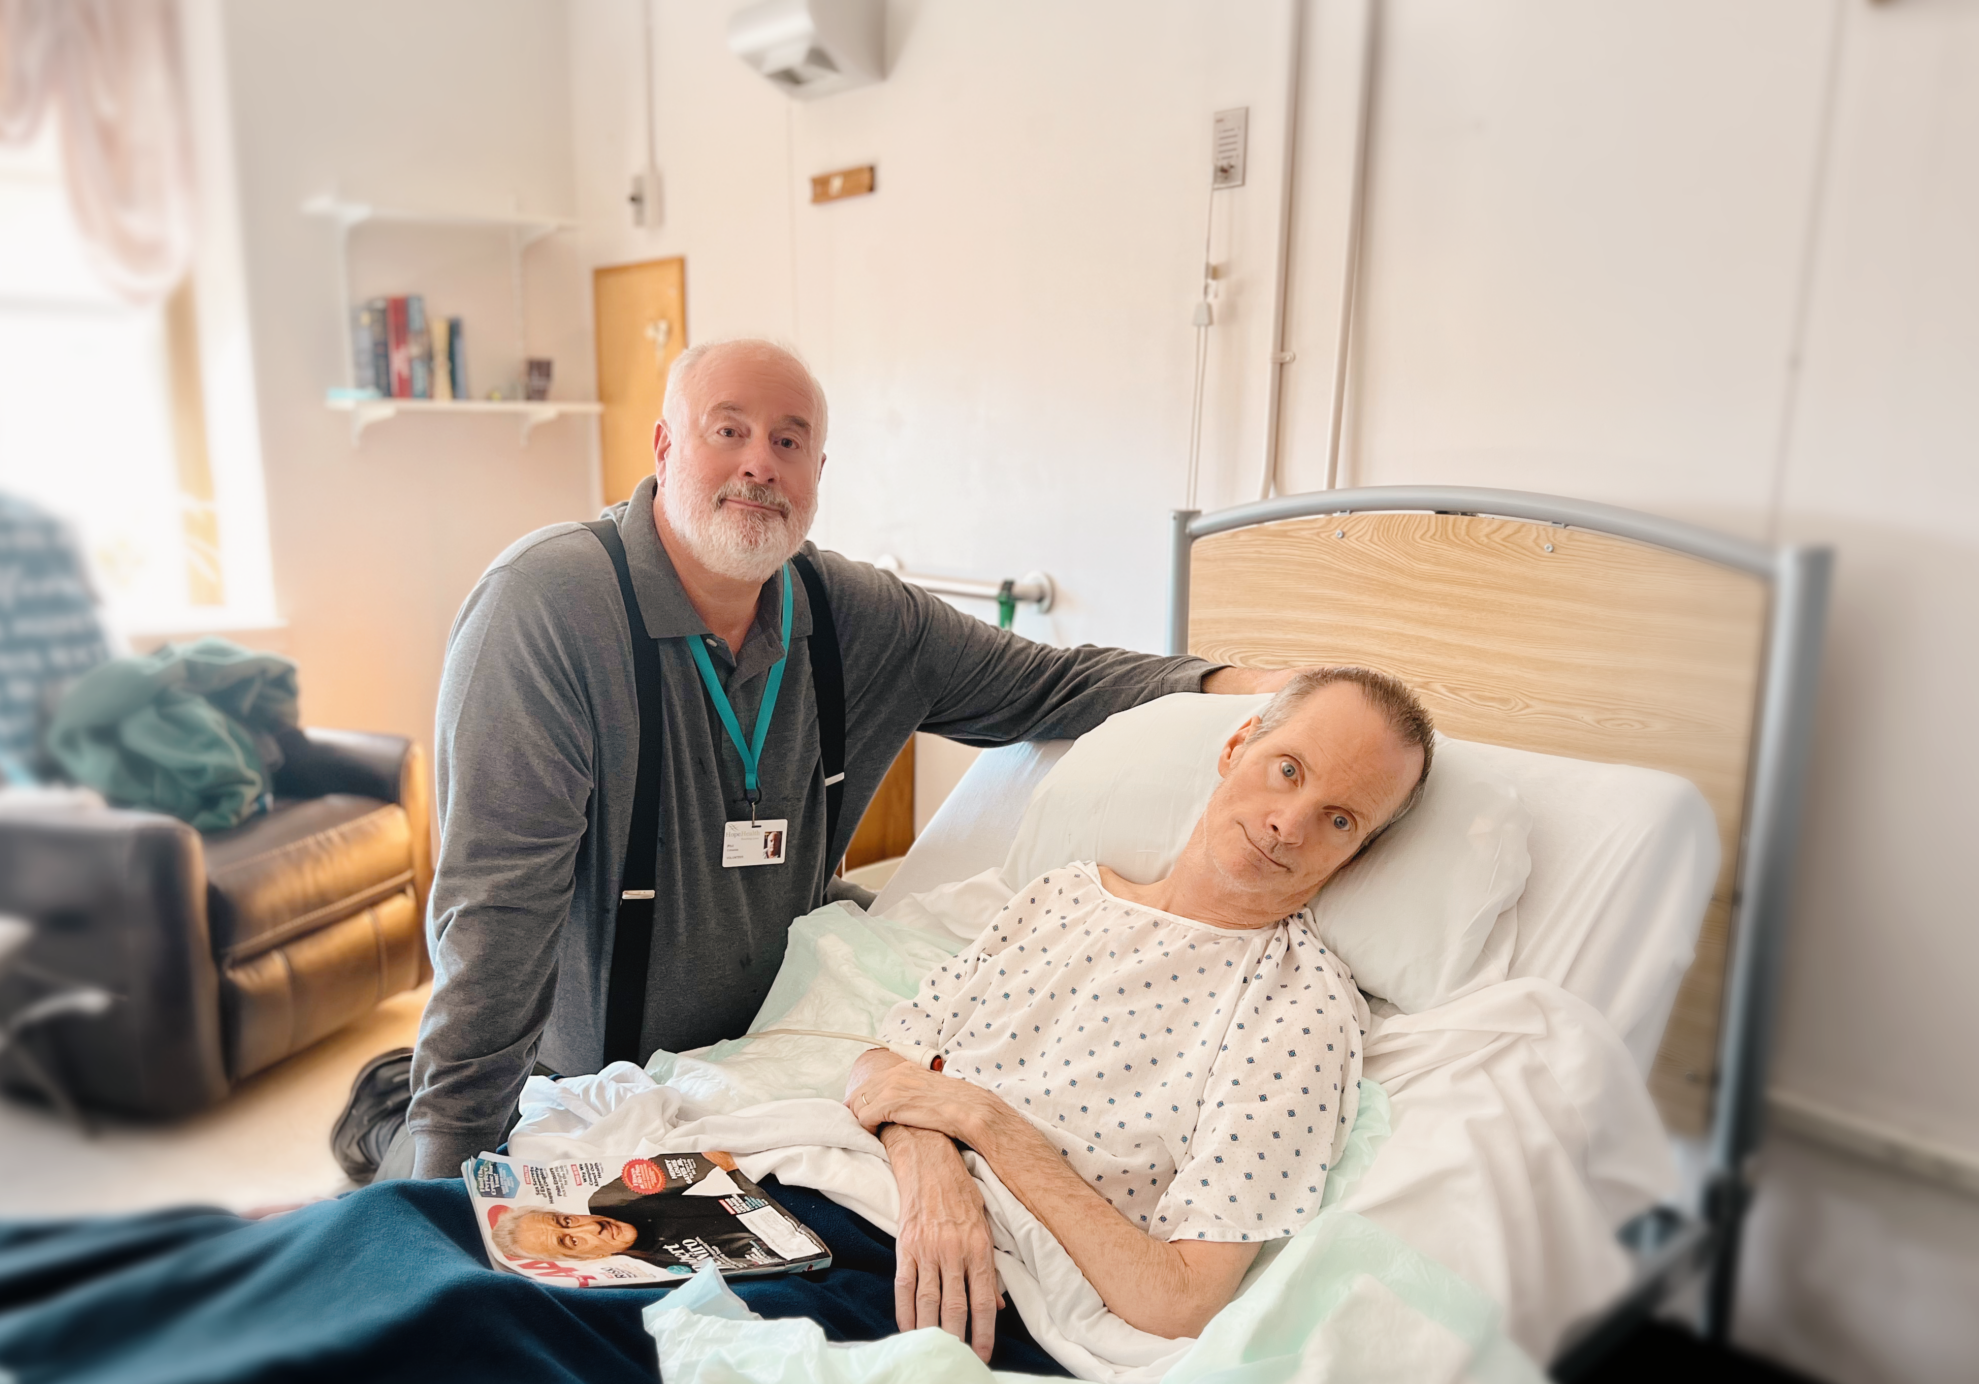 A man in a gray shirt and suspenders compassionately sits by a male hospice patient who is laying in a hospital bed